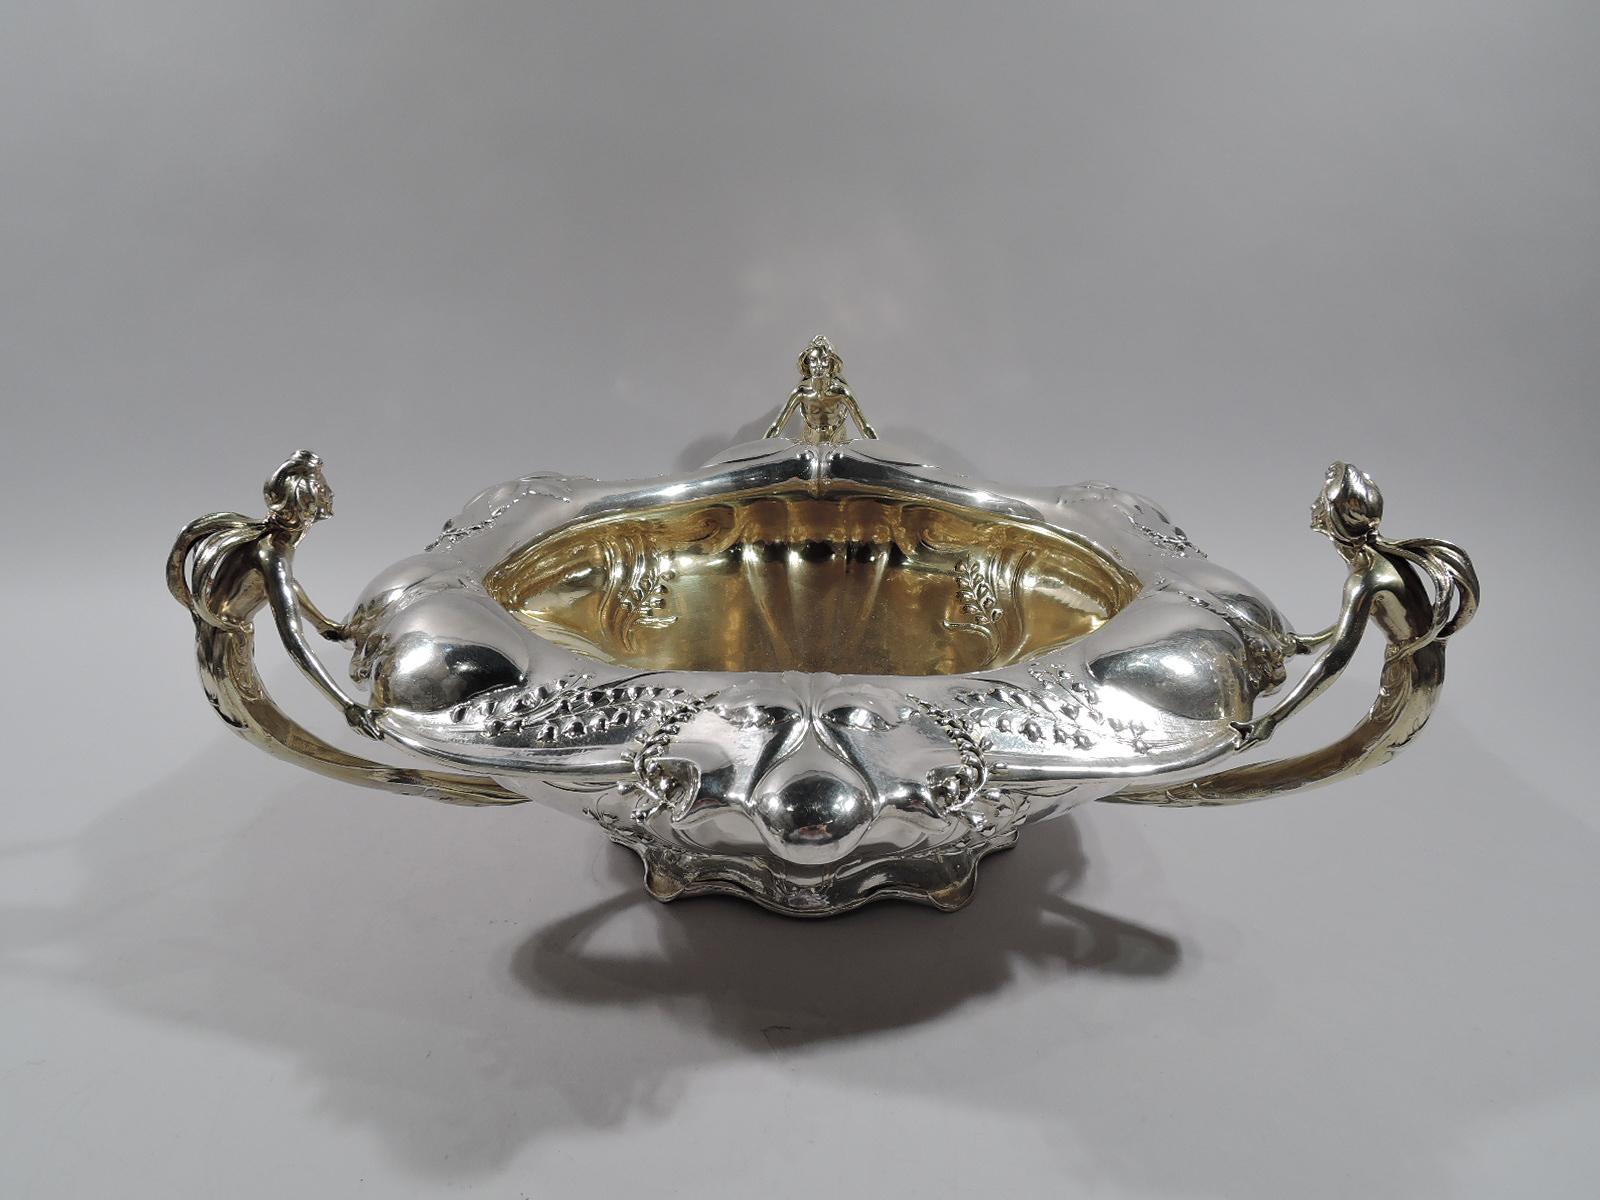 Art Nouveau Martelé silver centerpiece. Made by Gorham in Providence, circa 1920. Bellied on raised and scrolled and curling foot. Rim wide and turned down with chased vegetation with serrated leaves, and chased and applied flowers (lily of the